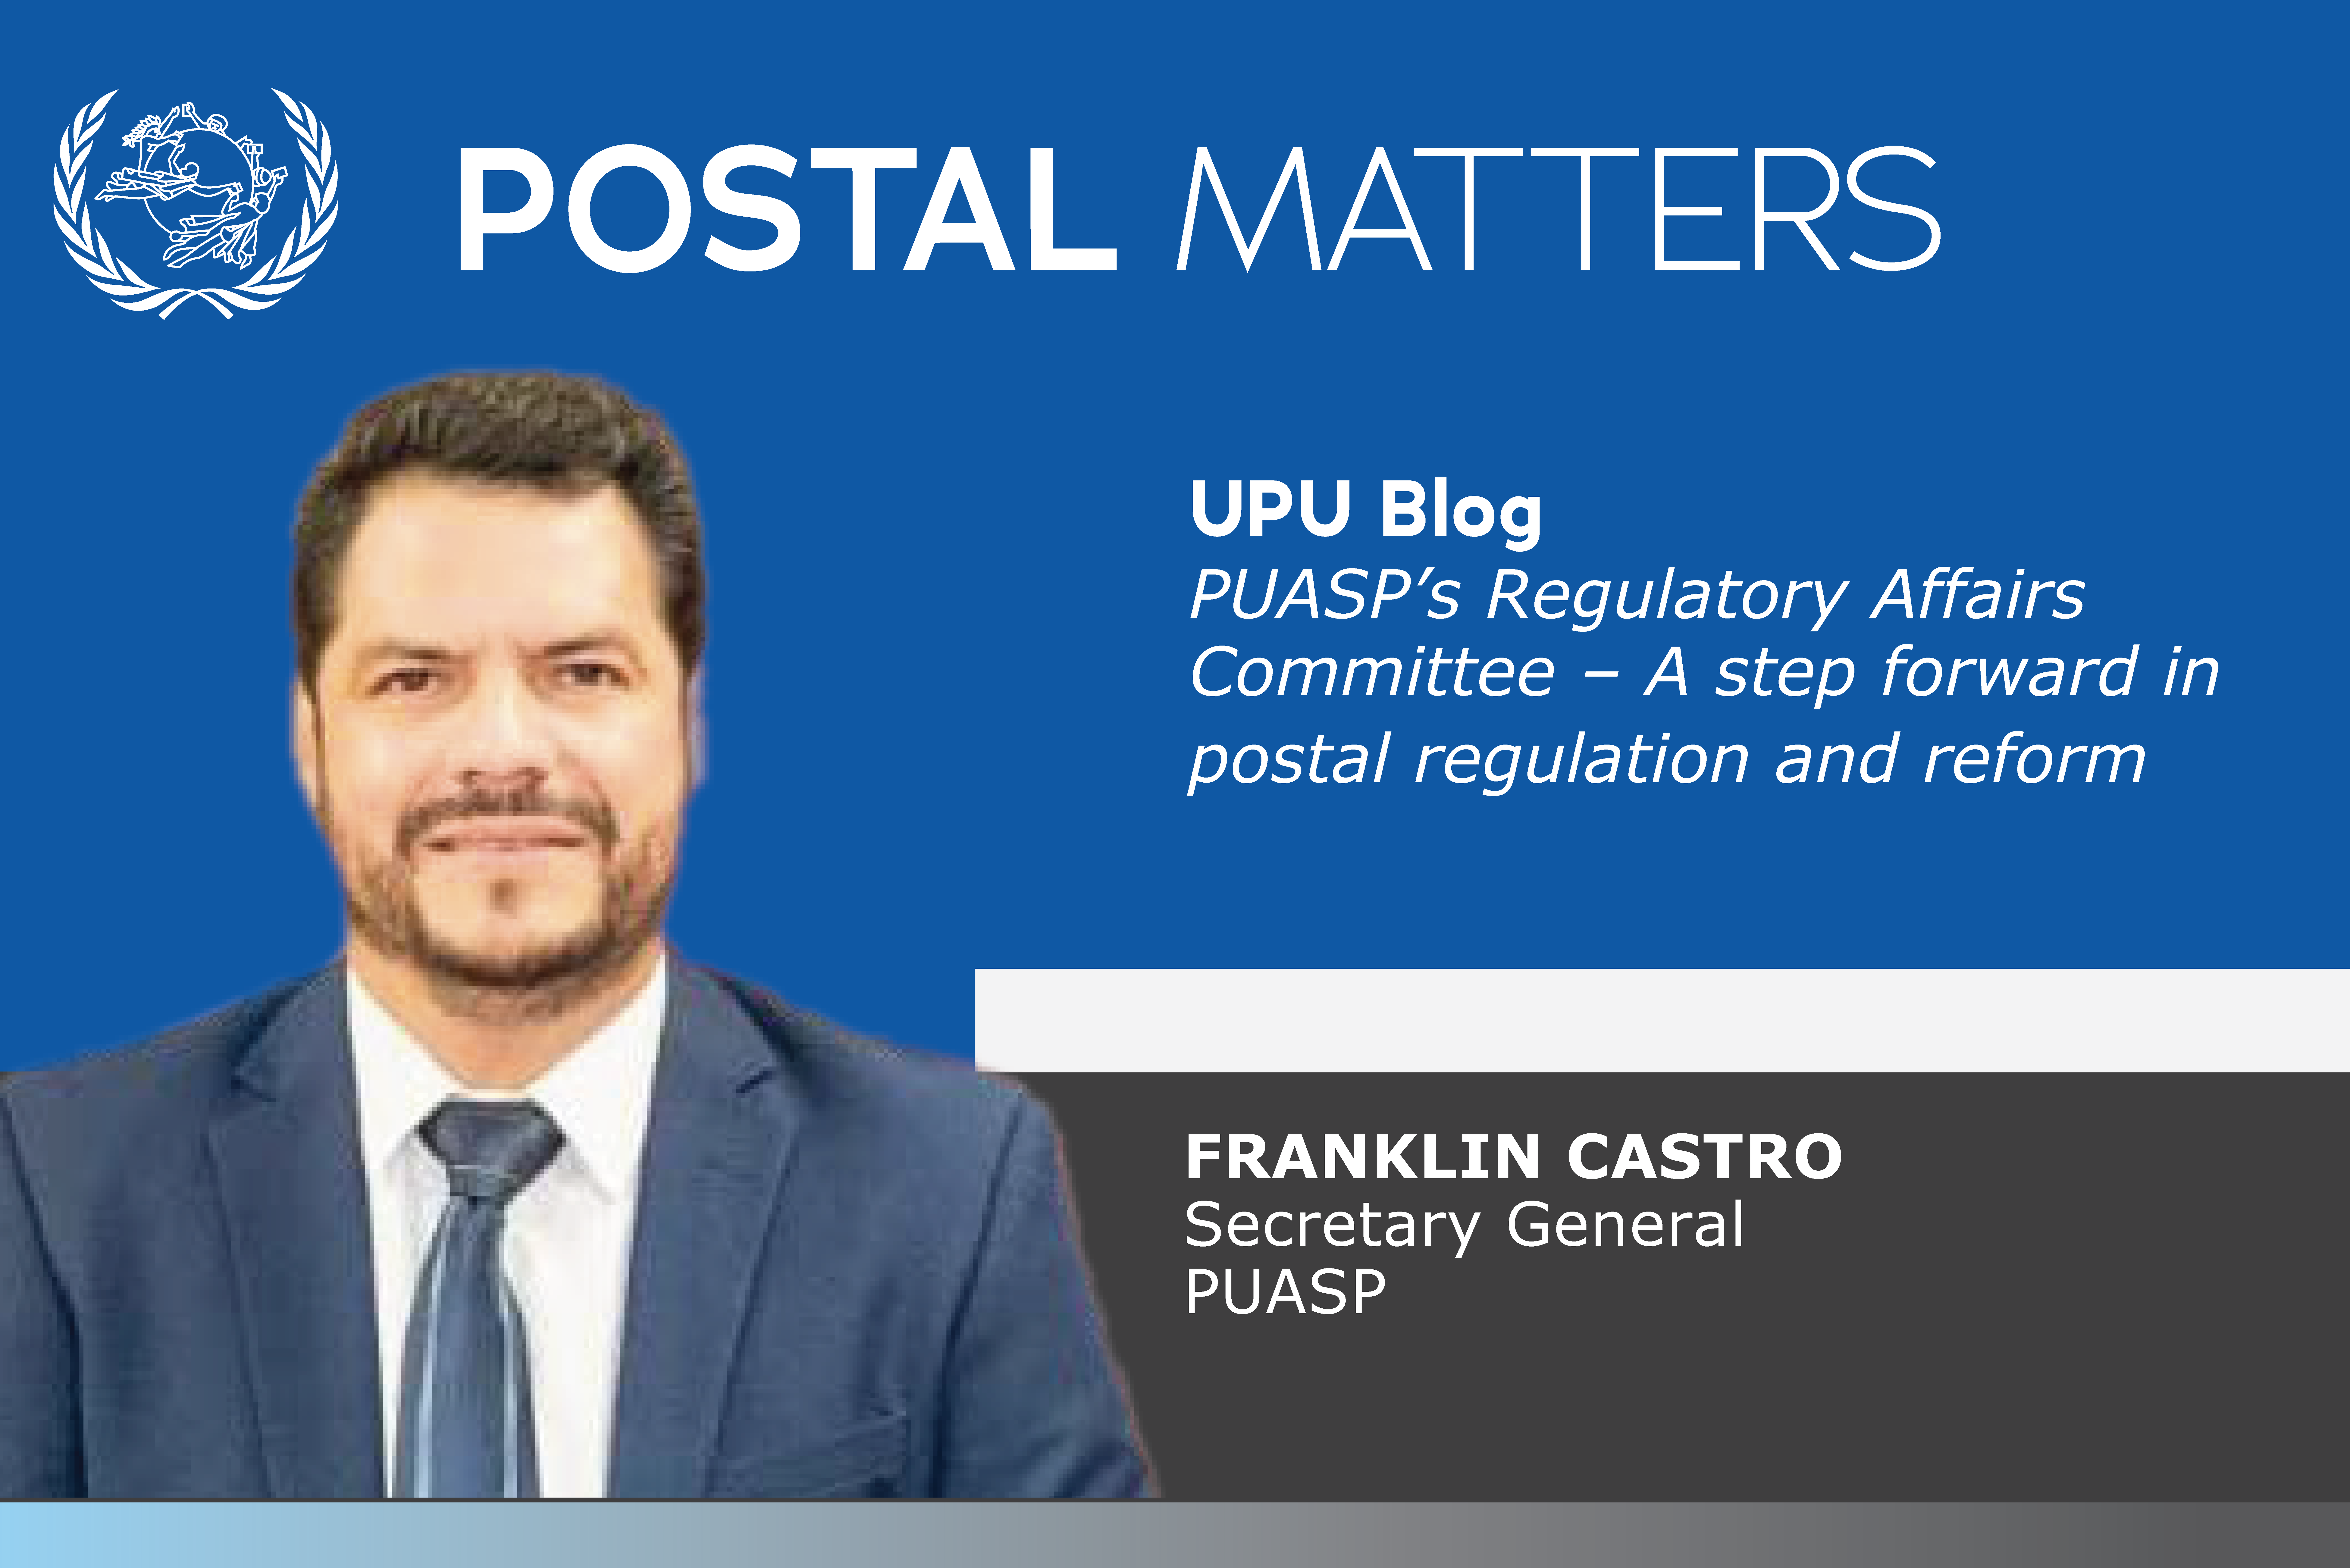 PUASP’s Regulatory Affairs Committee – A step forward in postal regulation and reform